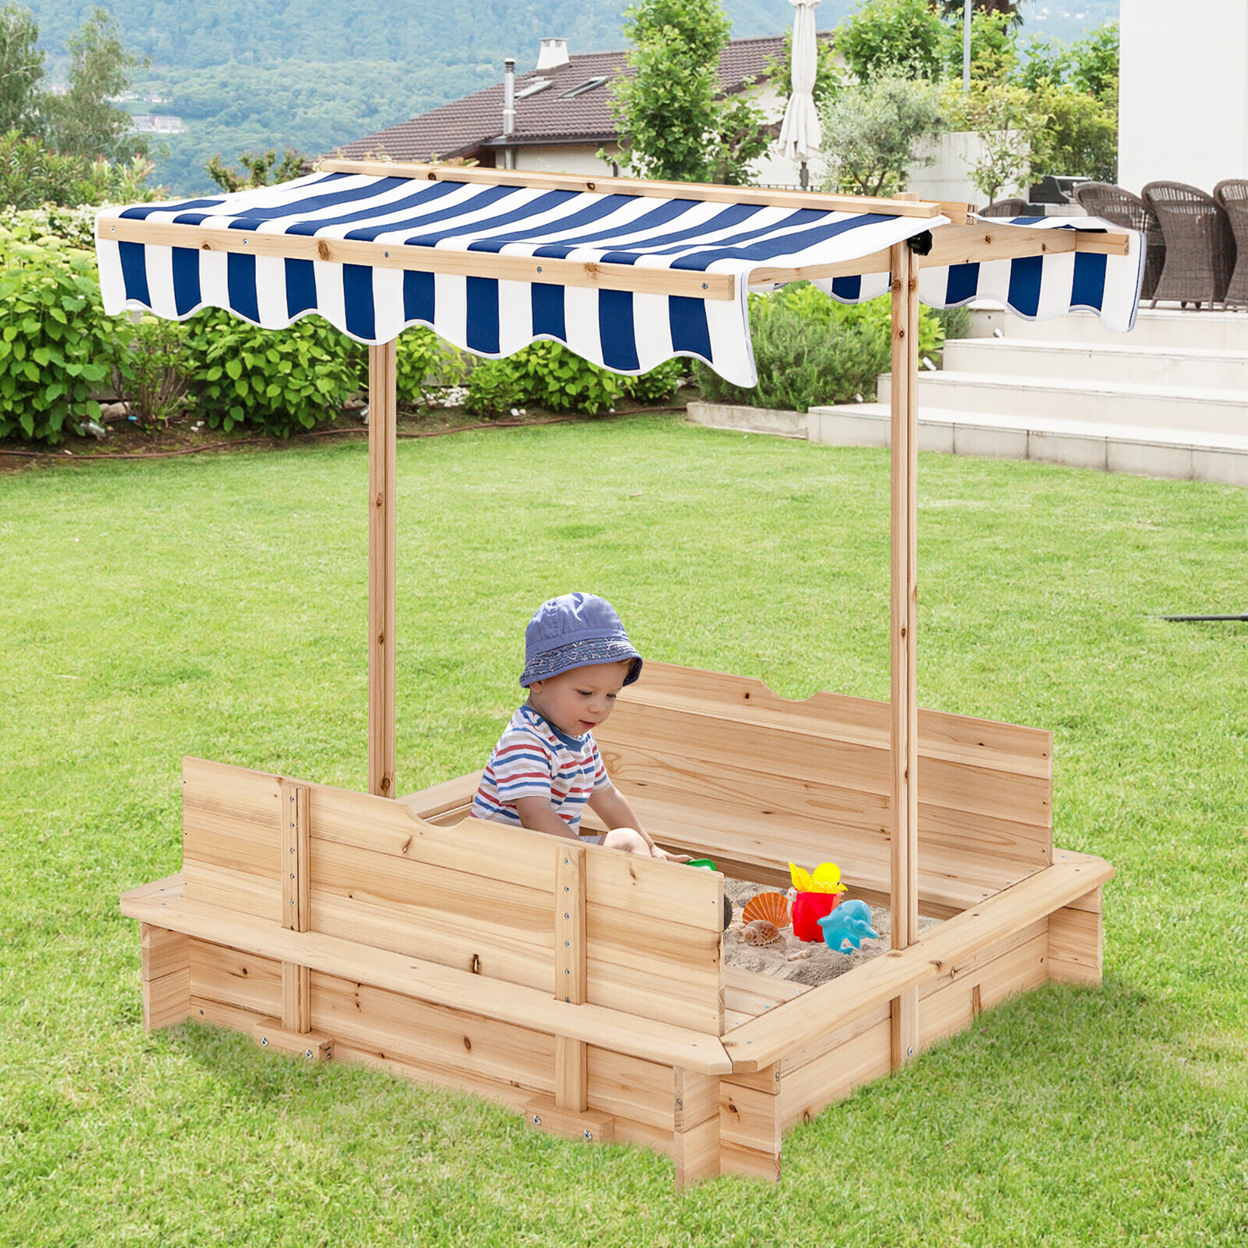 Kids Wooden Sandbox With Canopy & Foldable Bench Seats